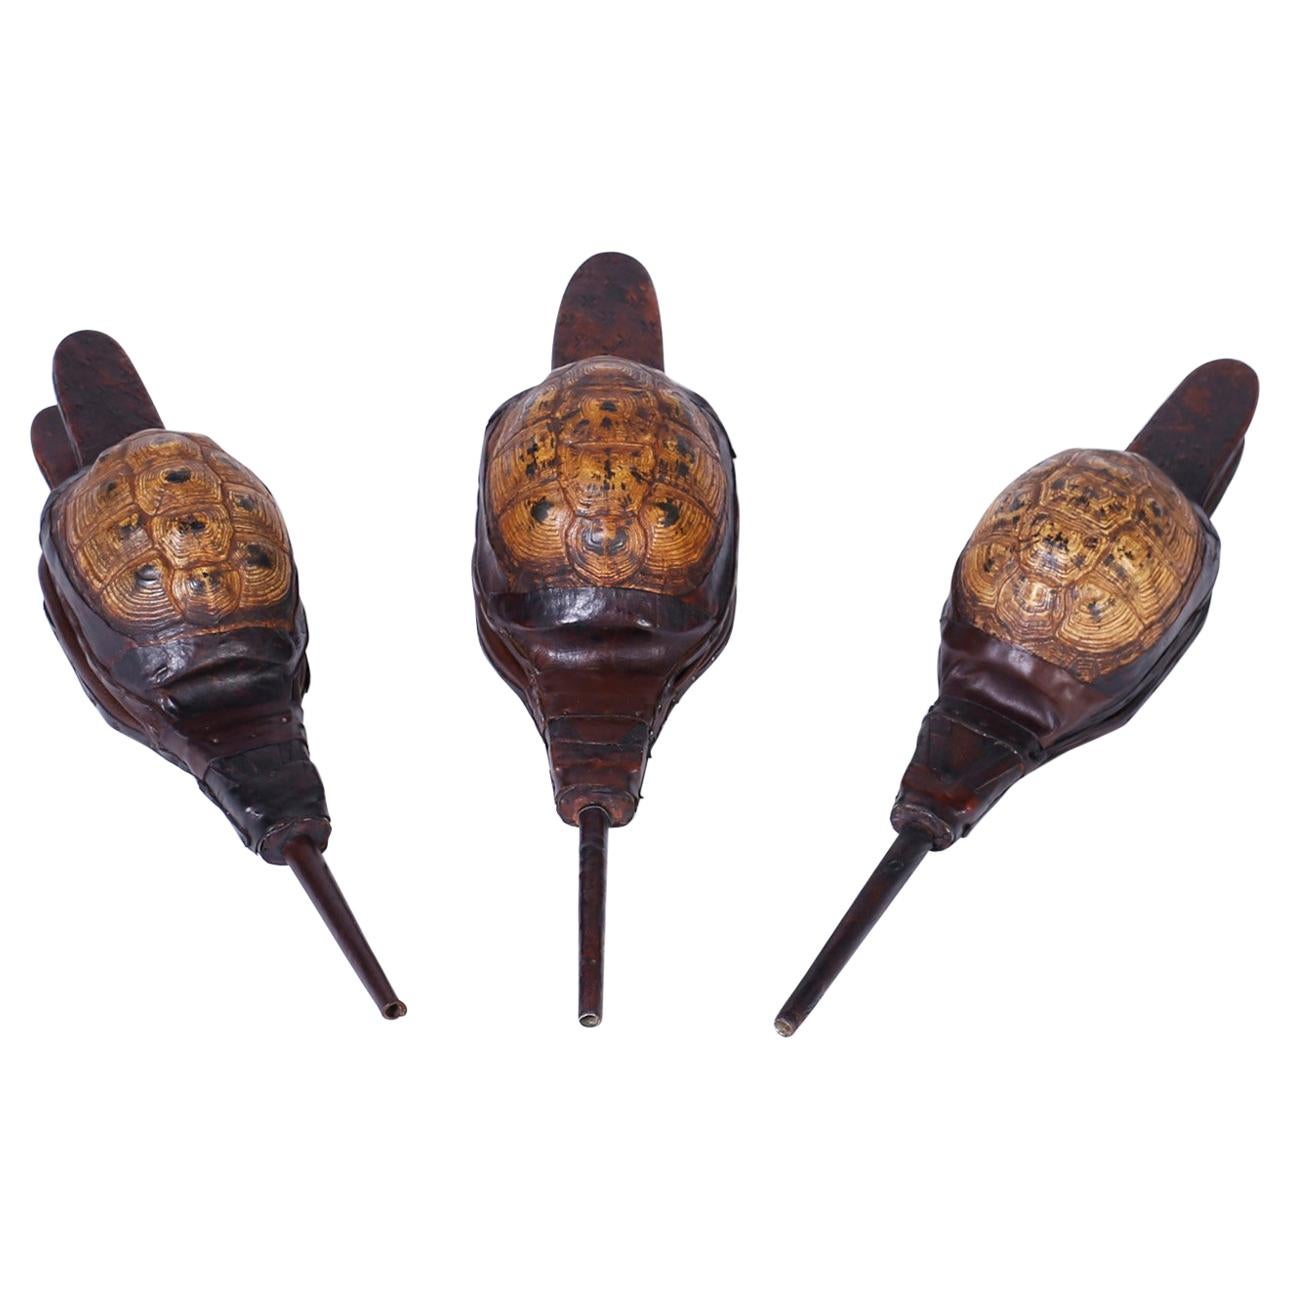 Three Antique Turtle Shell Bellows, Priced Individually